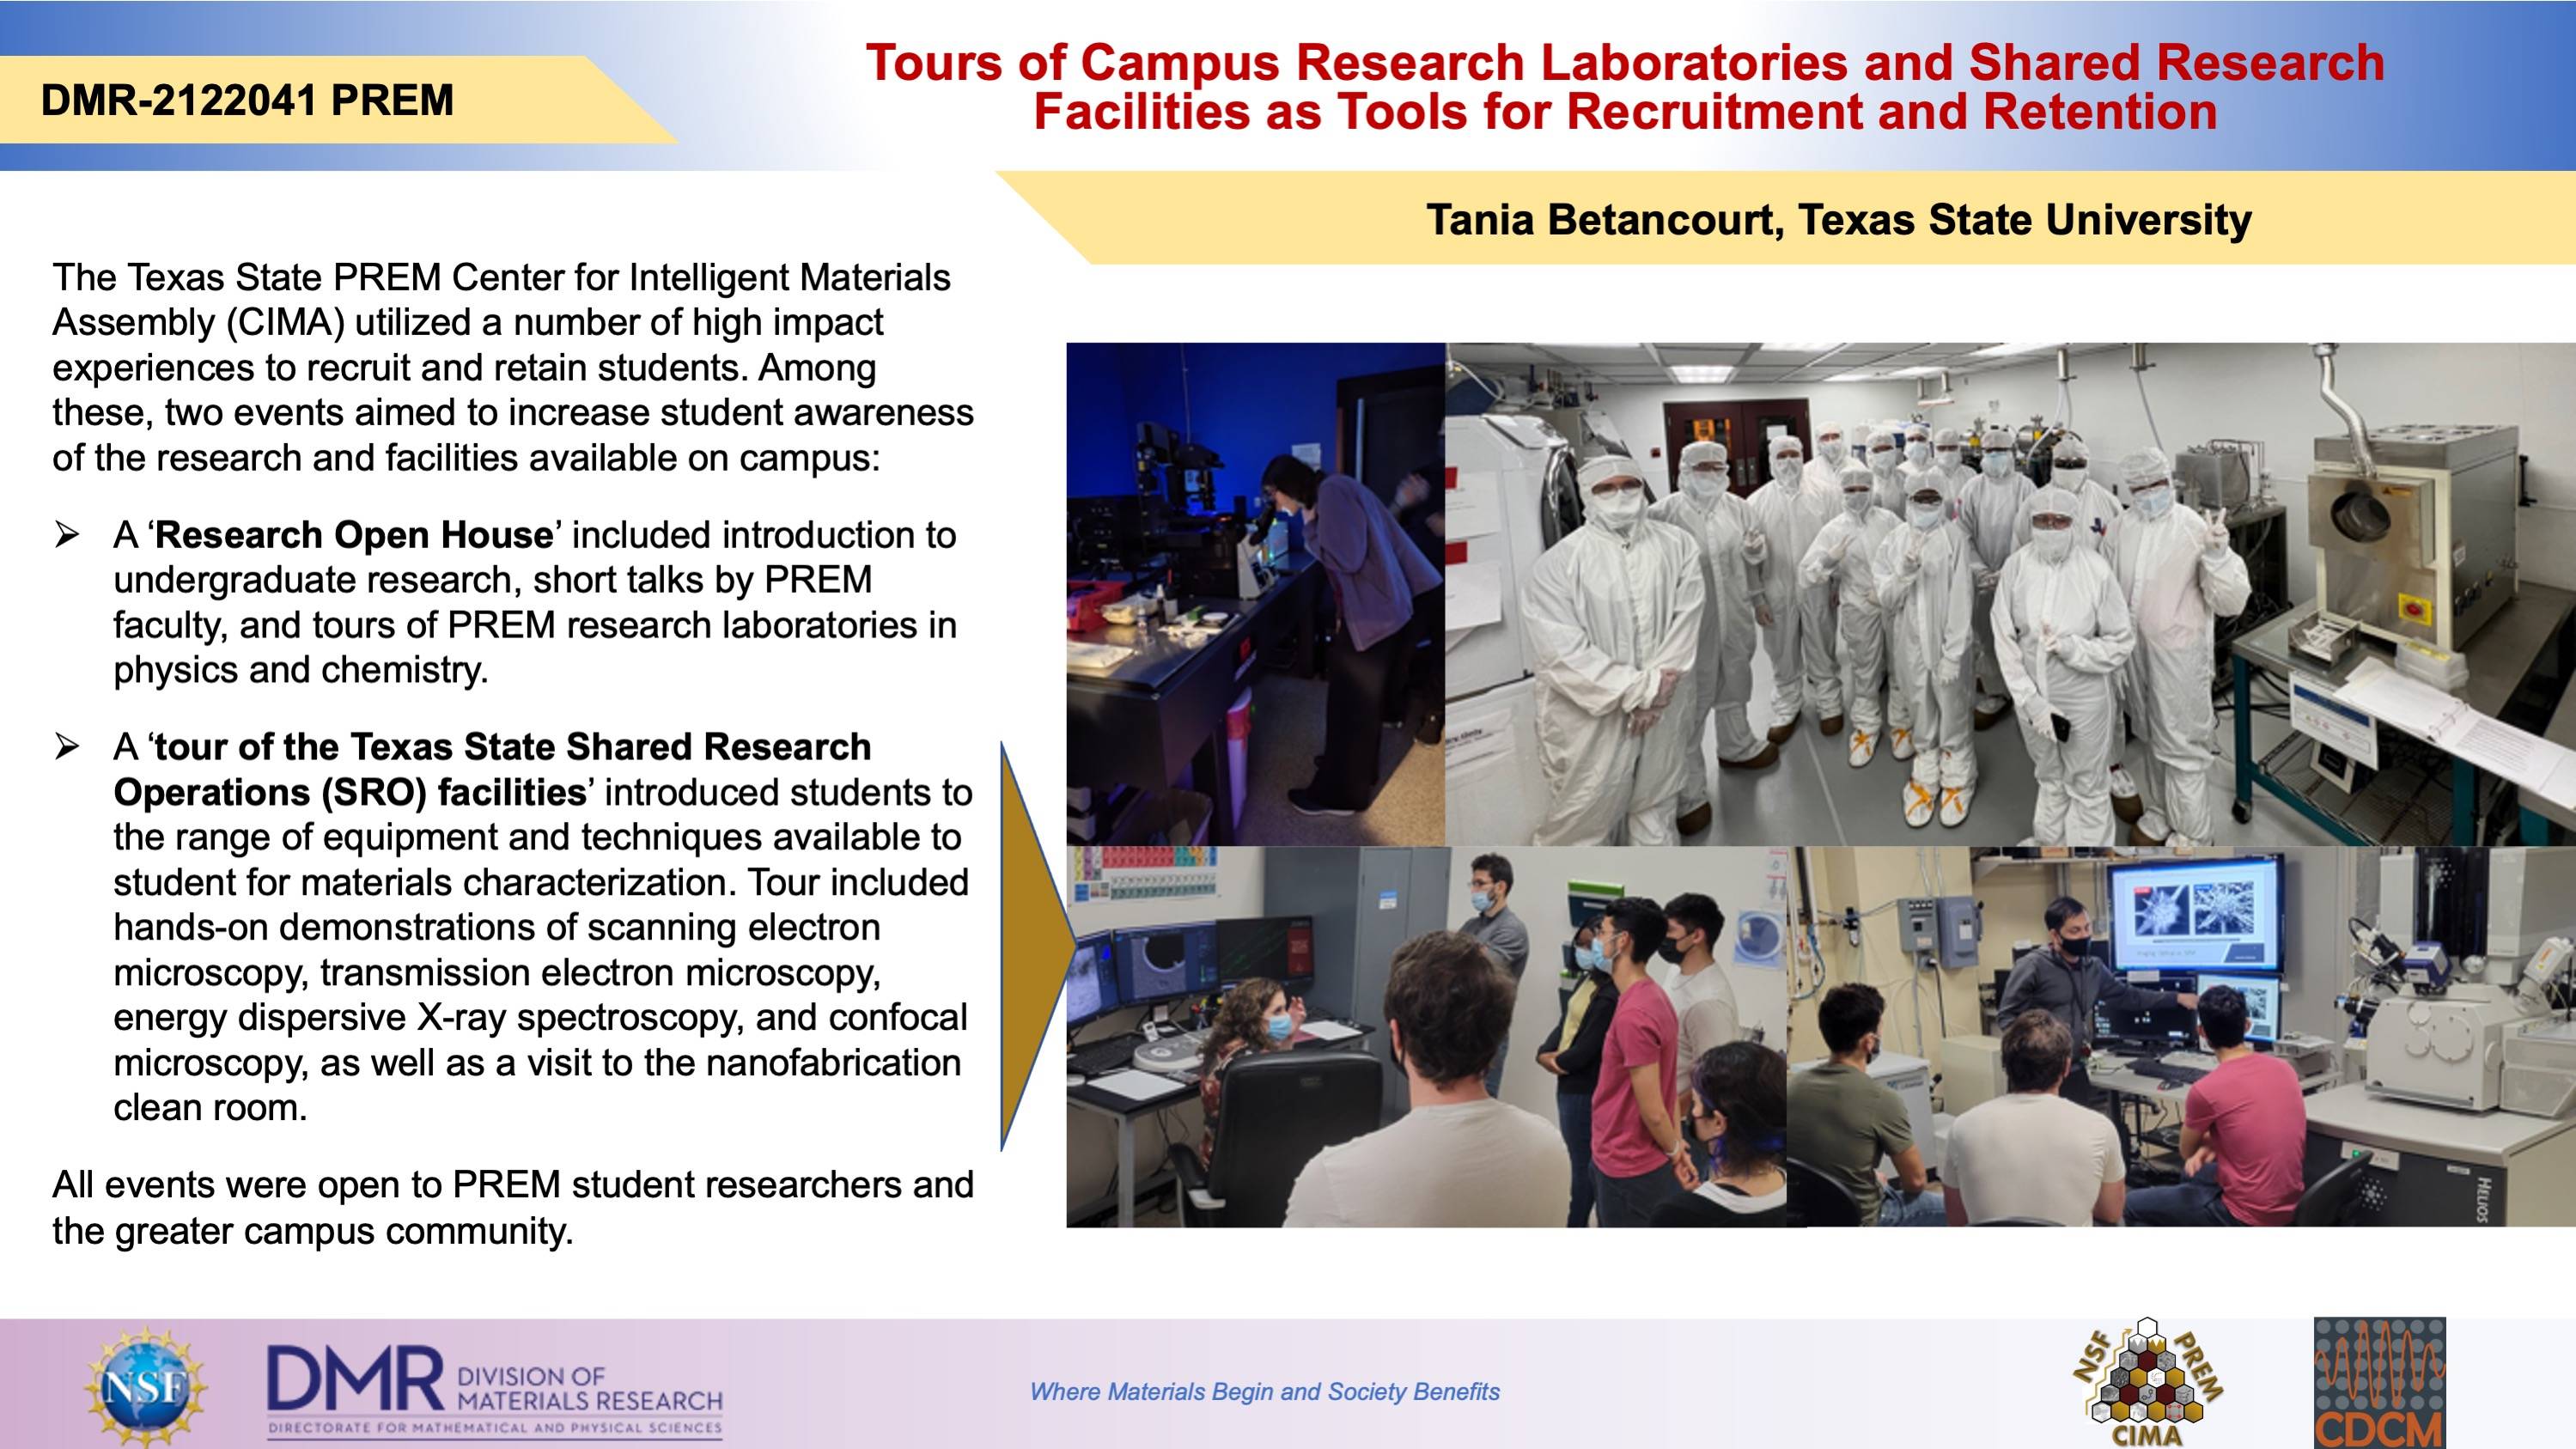 Highlight on Tours of Campus Research Laboratories and Shared Research Facilities as Tools for Recruitment and Retention